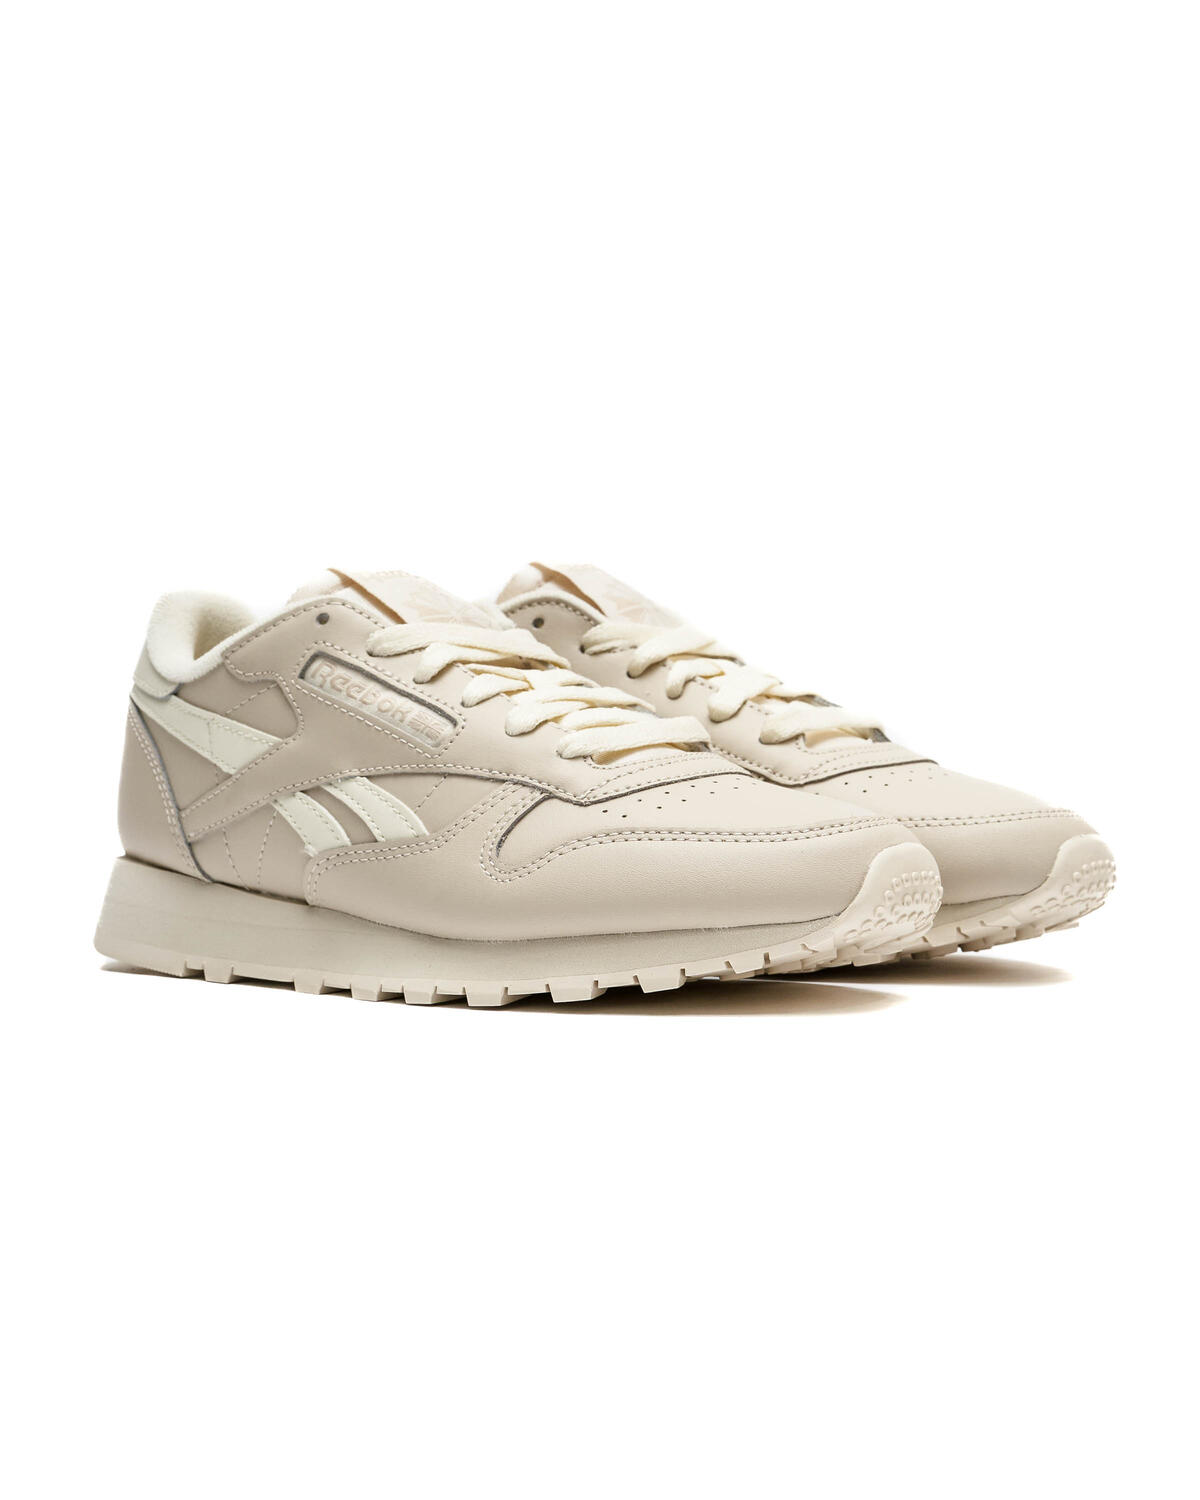 Reebok WMNS CLASSIC LEATHER | STORE AFEW IG9481 